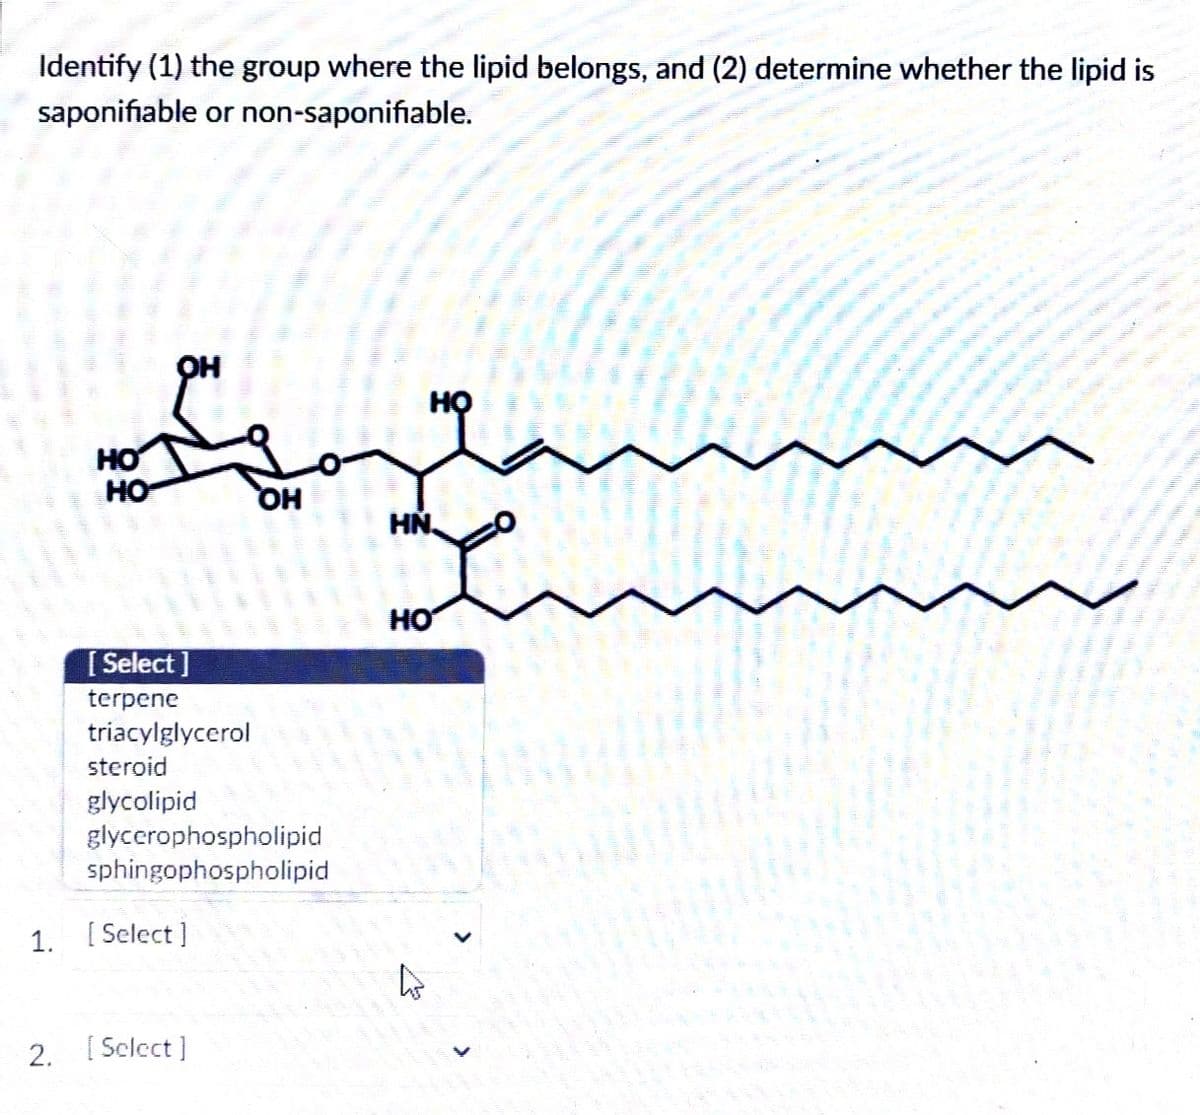 Identify (1) the group where the lipid belongs, and (2) determine whether the lipid is
saponifiable or non-saponifiable.
но
HO
HO
OH
[Select]
terpene
triacylglycerol
steroid
glycolipid
glycerophospholipid
sphingophospholipid
1. [Select]
2. [Select]
HN.
HO
4